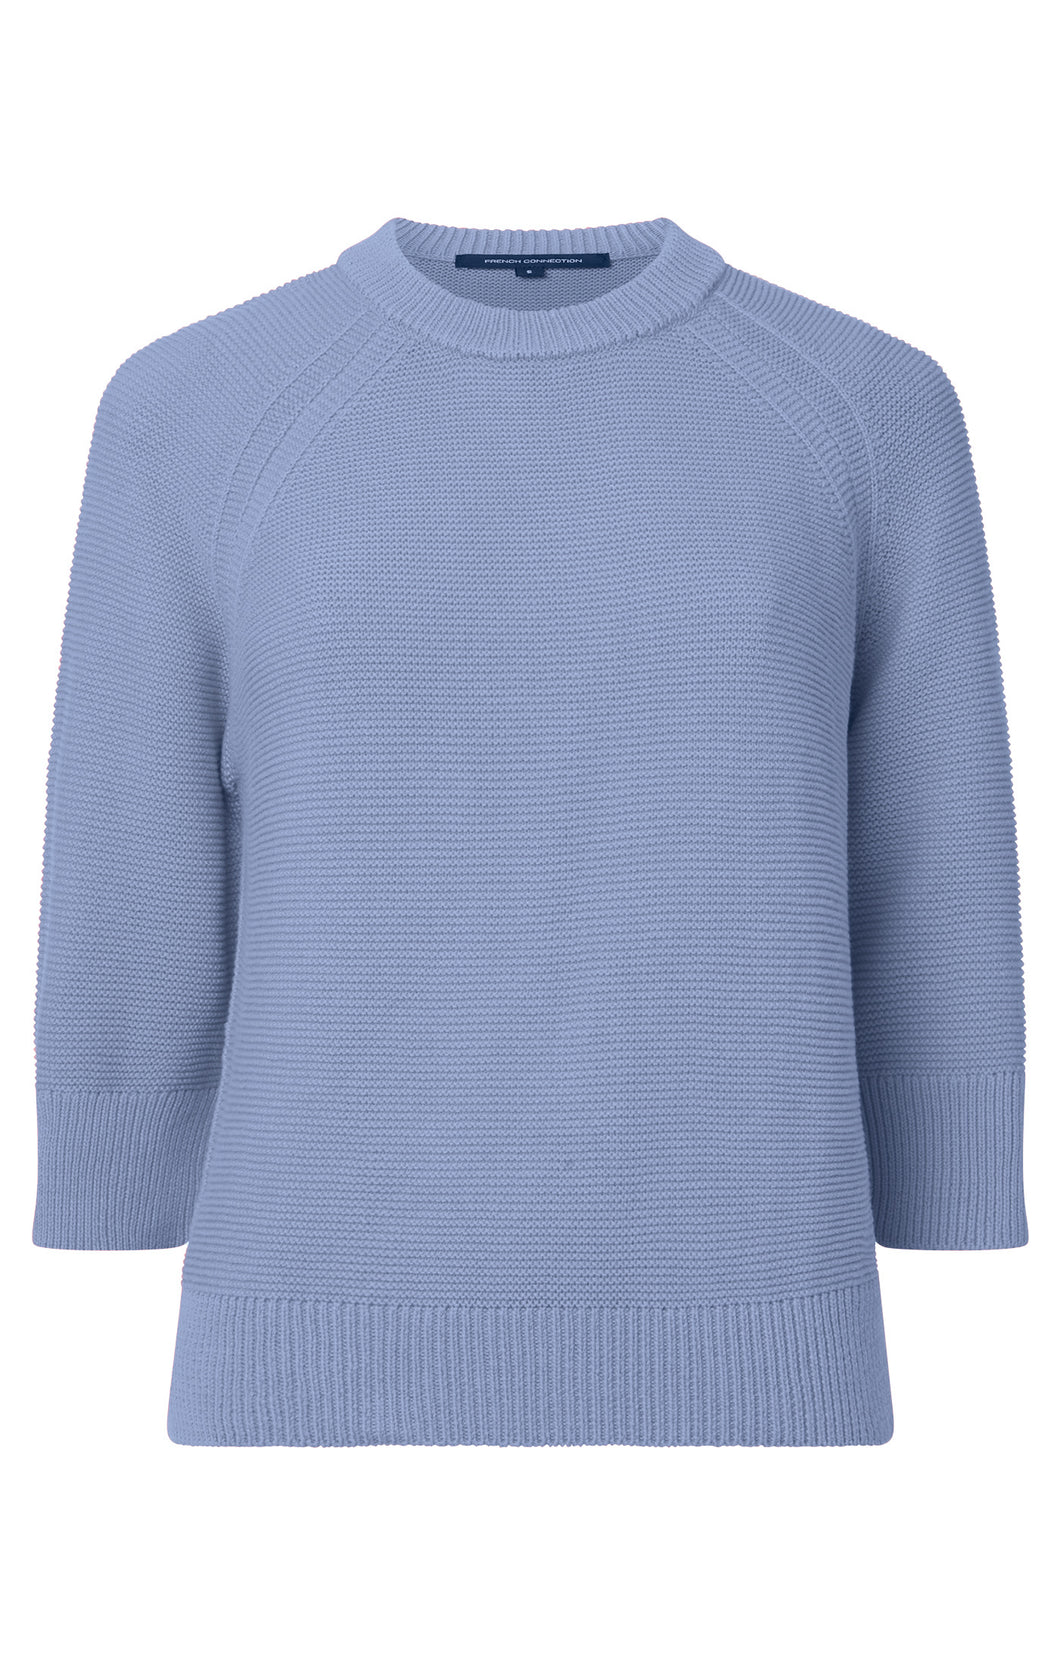 French Connection - Lily Mozart Jumper in Bluebell